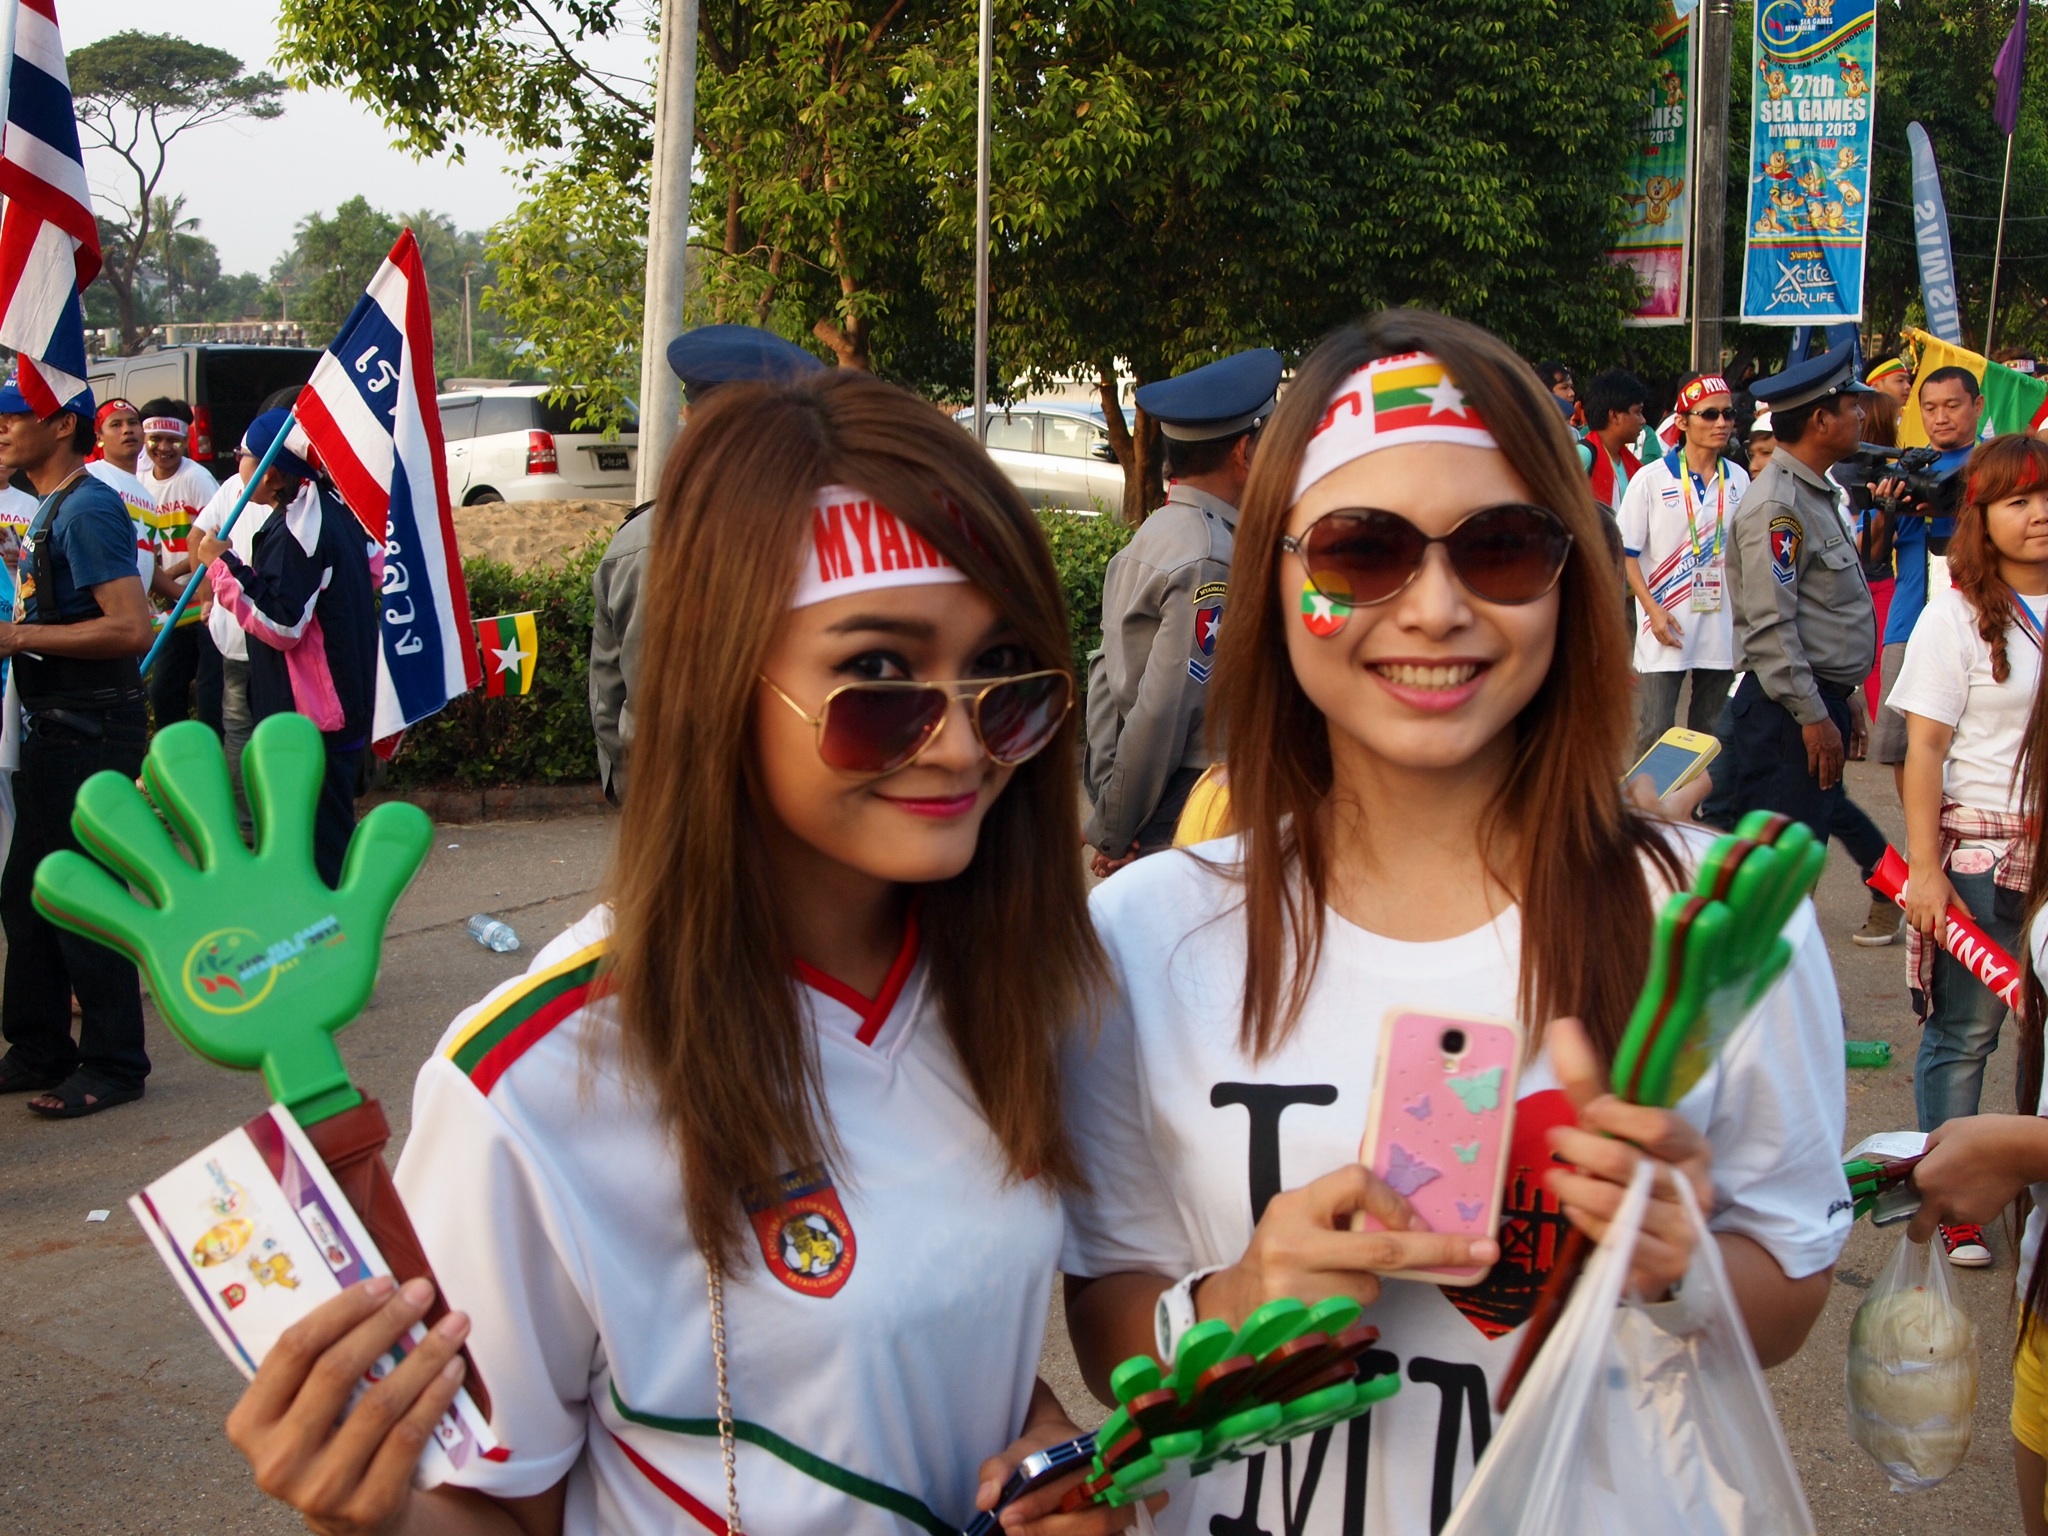 Two cuties ready to root for Myanmar. Photo: Flickr / HeyItsWilliam